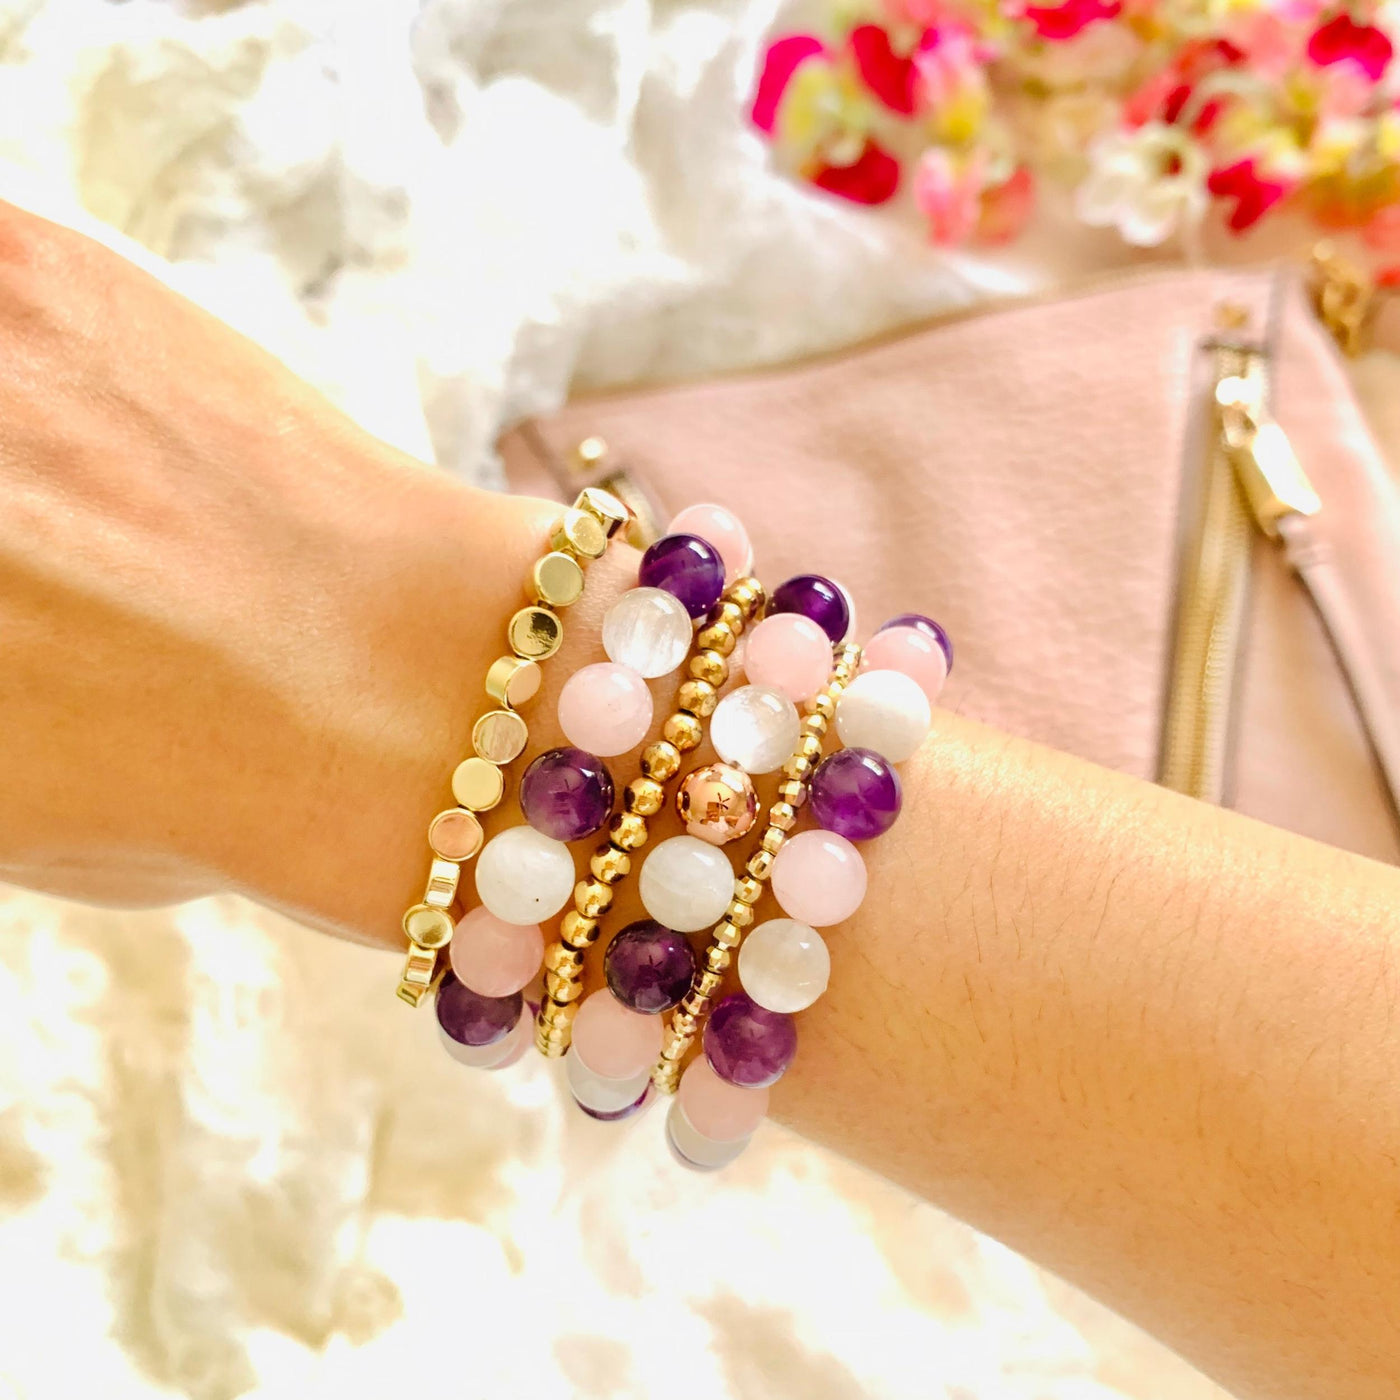 Benefits of Wearing Crystal Bracelets and Other Crystal Jewelry | by  Contempo Crystals | Medium